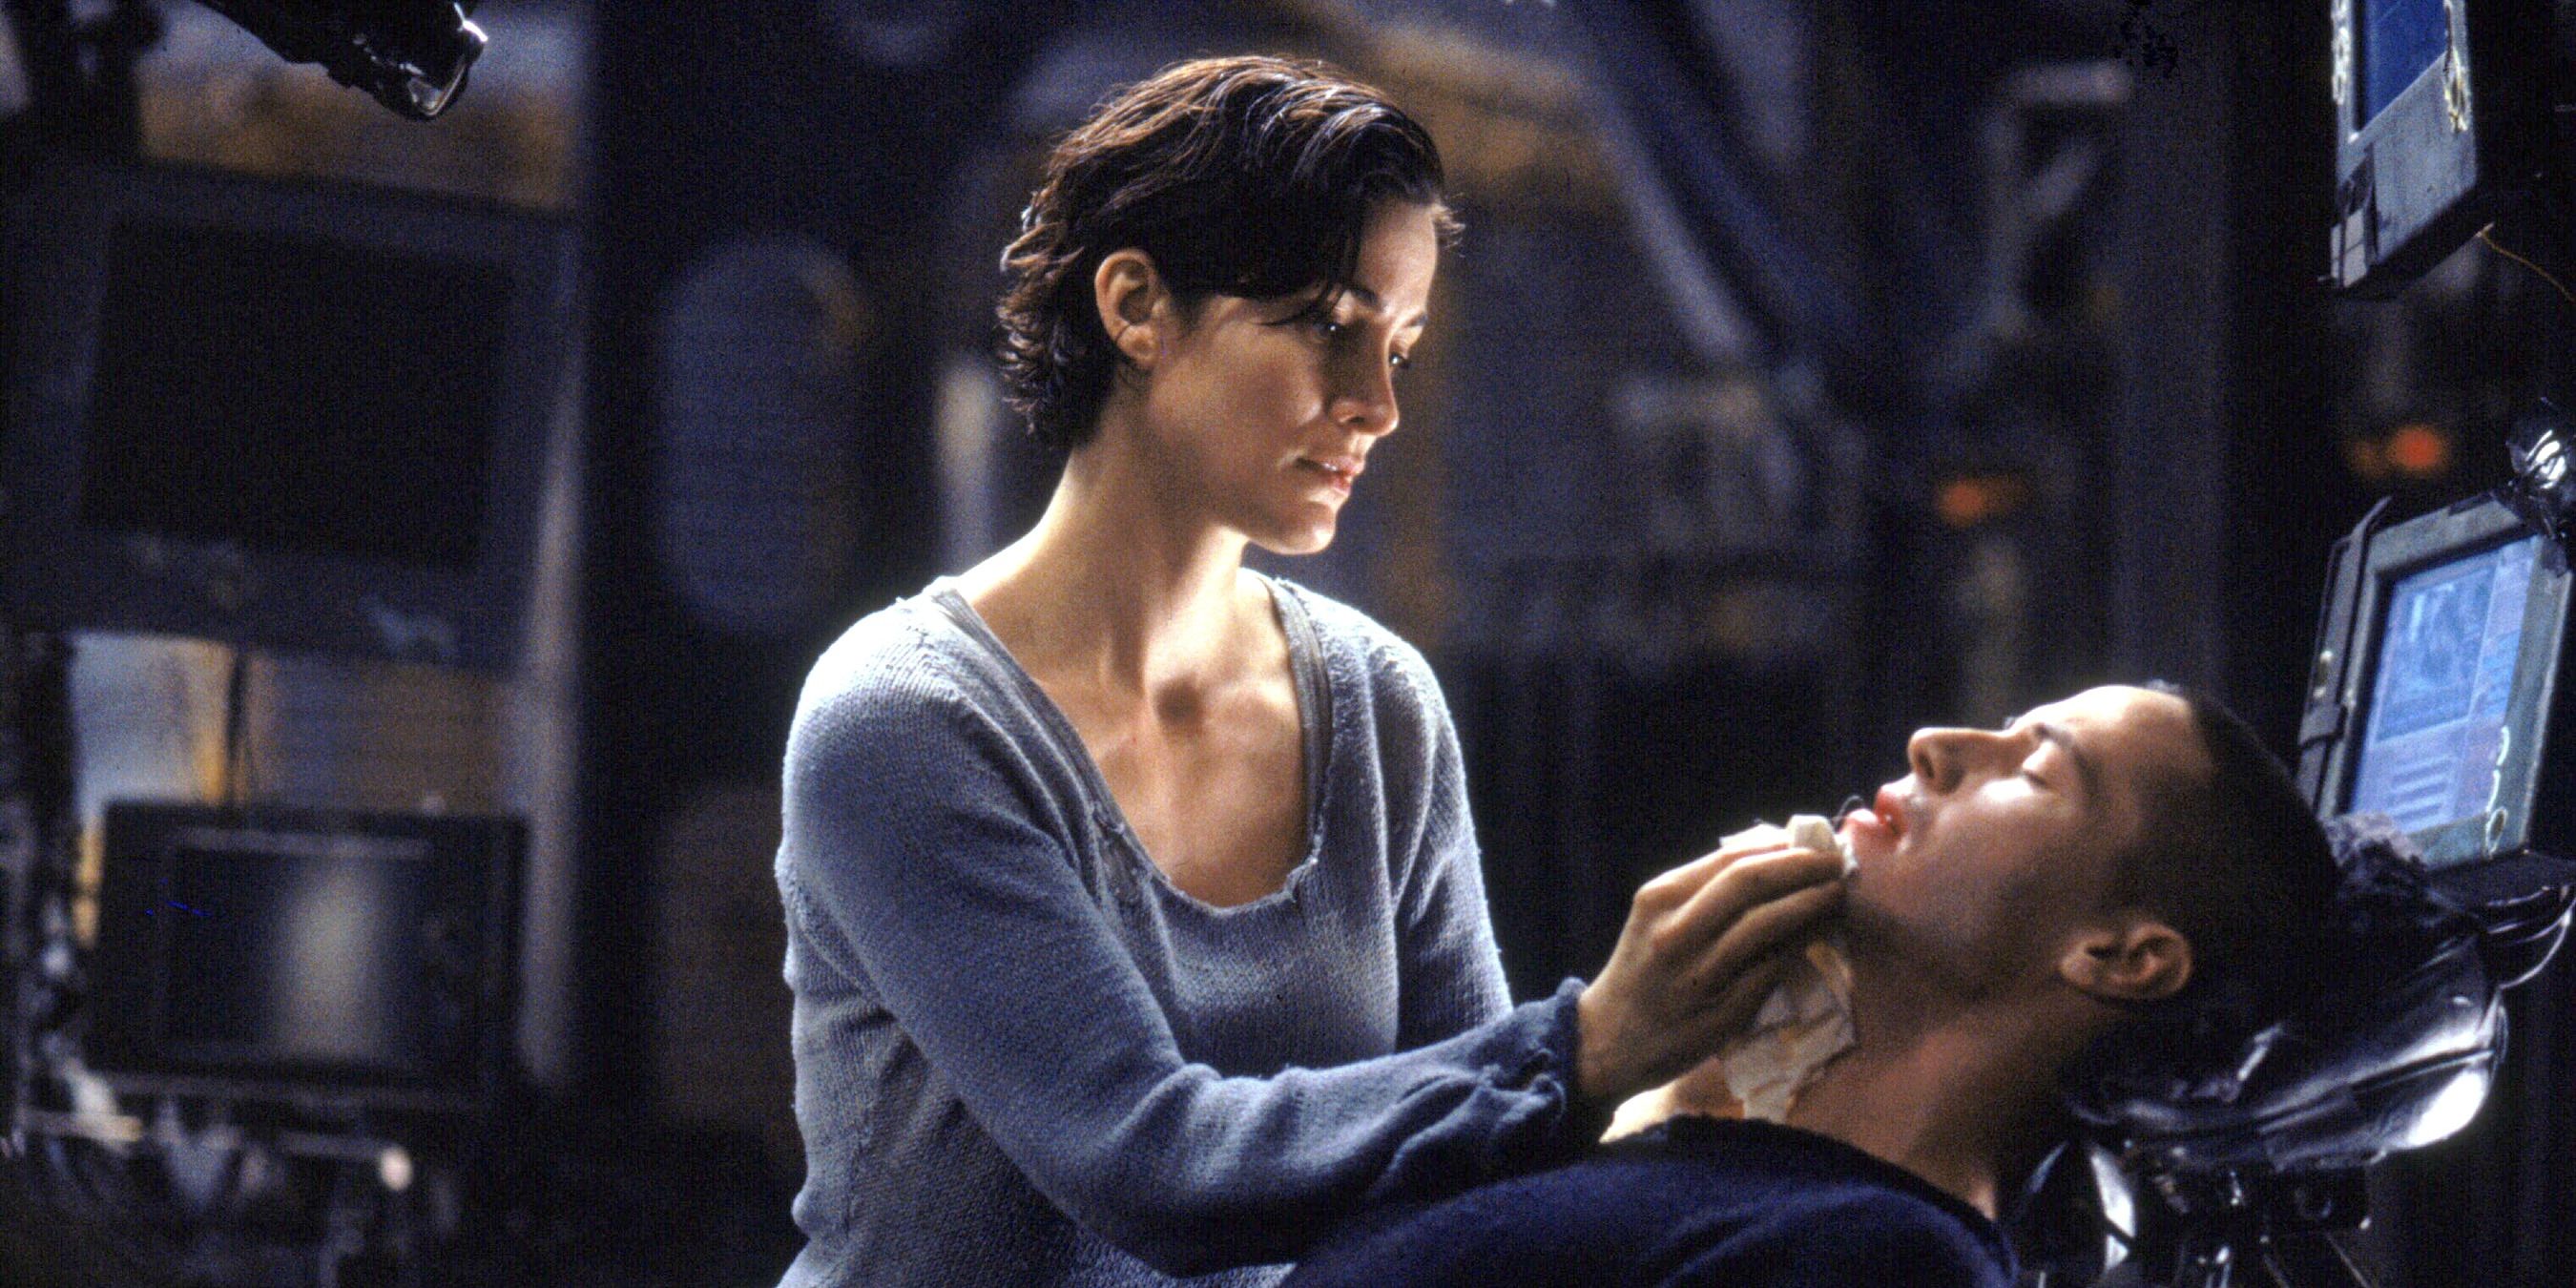 Trinity (Carrie-Anne Moss) tends to Neo (Keanu Reeves) outside of the simulation in 'The Matrix'